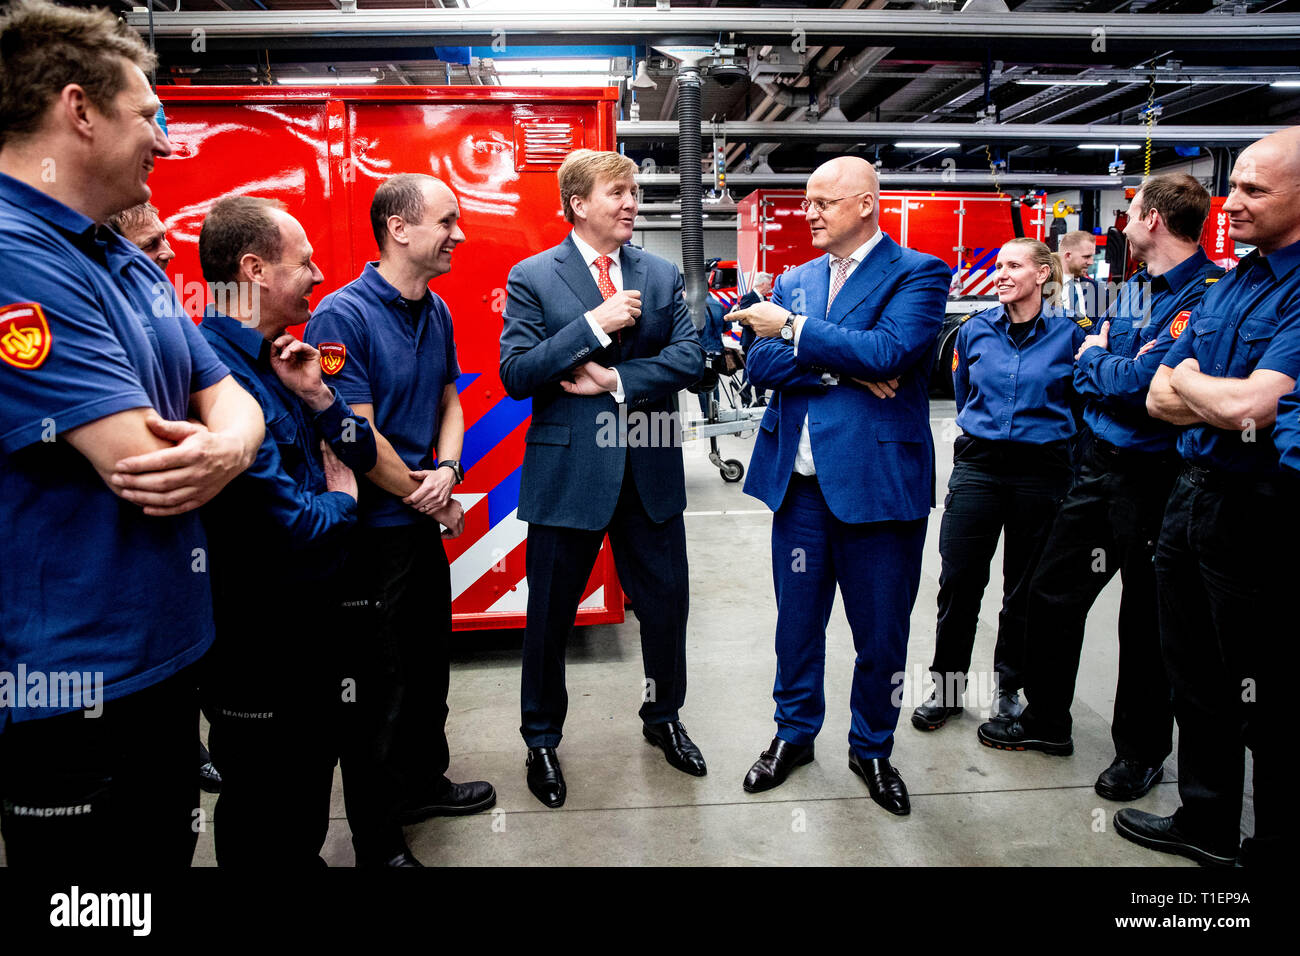 Tilburg, Netherlands. 26th Mar, 2019. King Willem-Alexander visit the safety region Midden-West Brabant with Justice minister Ferdinand Grapperhaus in Tilburg, The Netherlands, 26 March 2019. The King and Minister get an tour through a forestation. The visit is part of a series of visits with ministers. copyrught Credit: robin utrecht/Alamy Live News Stock Photo